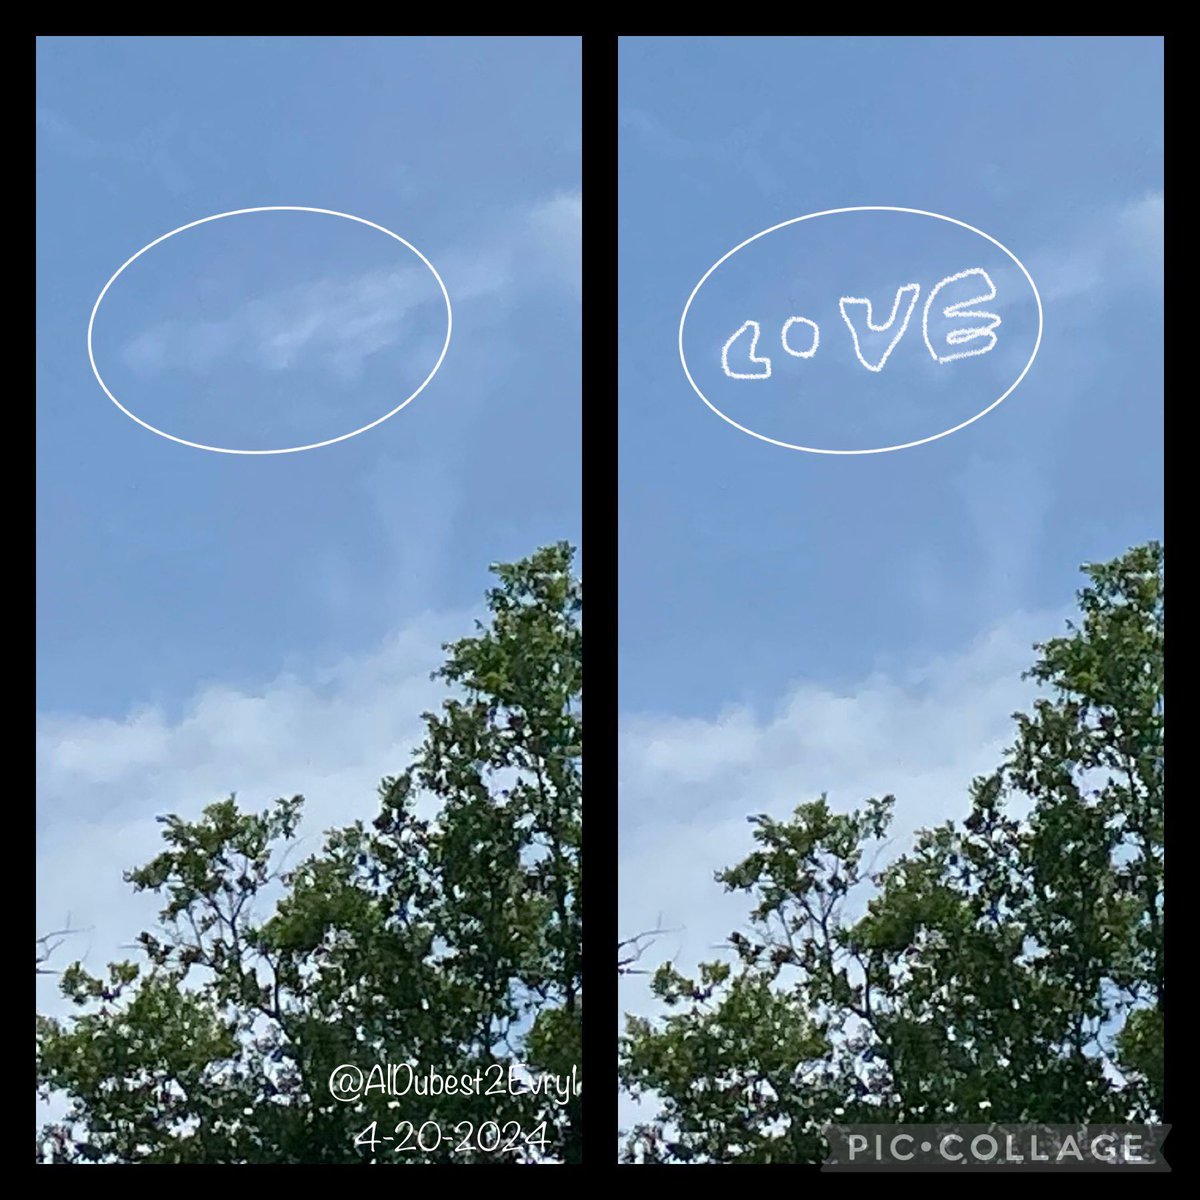 “LOVE “ clouds an hour ago.

#ThingsUnseen #Godwink #Godwinks #LoveLetter #YouAreLoved #cloud #SaturdayVibes #SaturdayThoughts 
#YourKingdomCome #YourWillBeDone #RemainInLove 

“Let all that you do be done in love.”  (1 Corinthians 16:14)

“God is love.” (1 John 4:16)